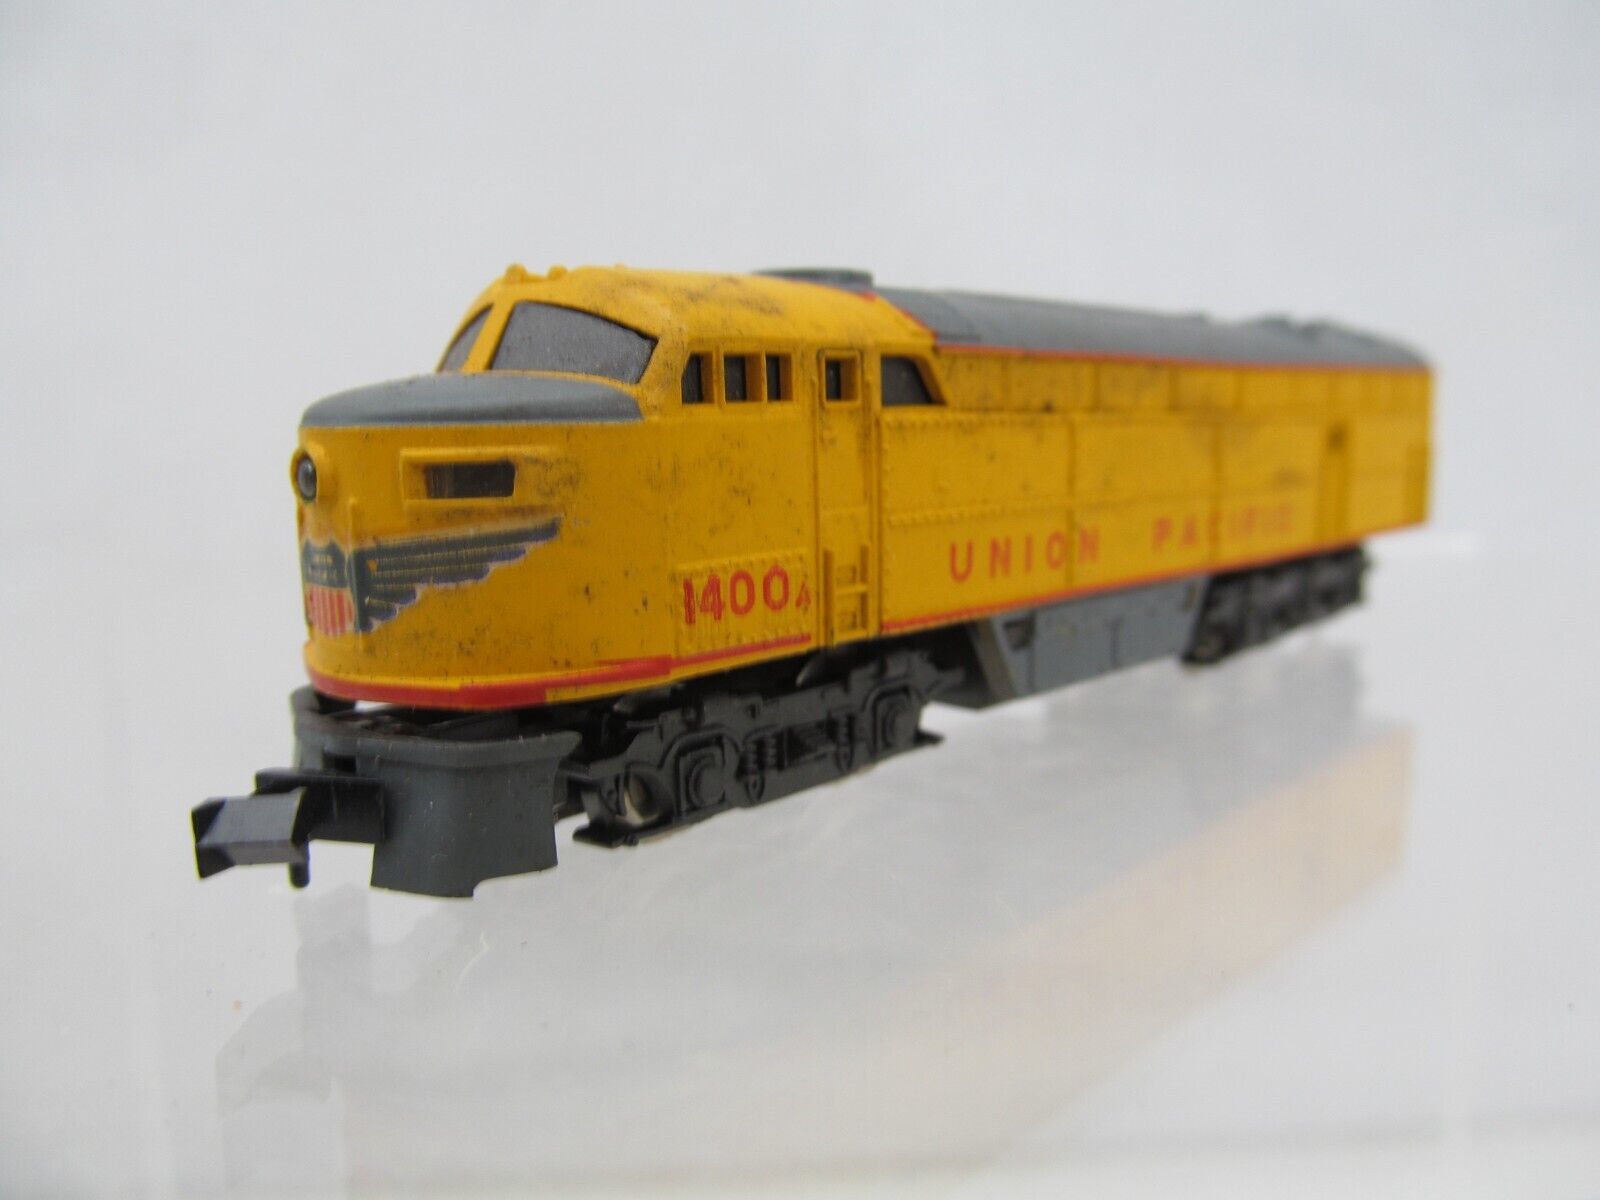 Primary image for Atlas by Rivarossi Trains N Union Pacific Diesel Locomotive Engine Dummy Unit